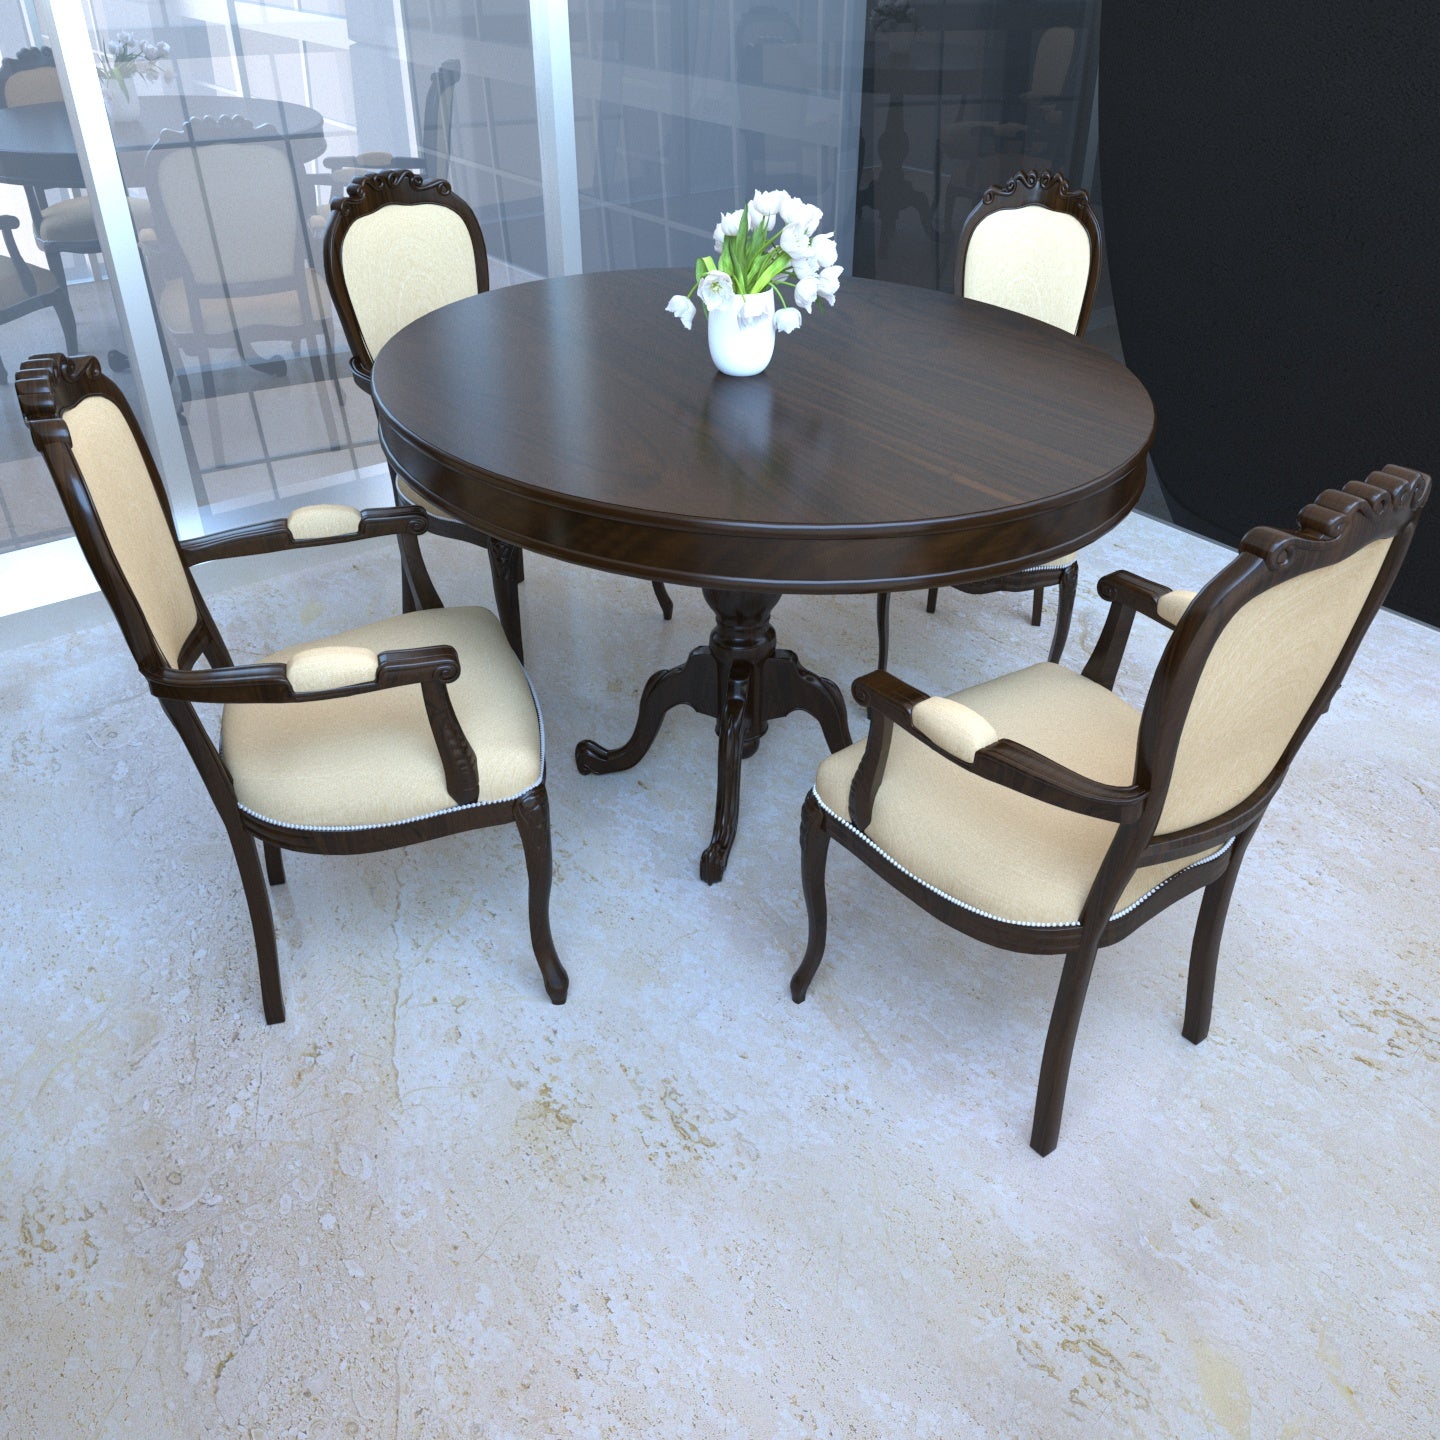 Retro Style Four Chair Round Table Complete Dining set Dining Set